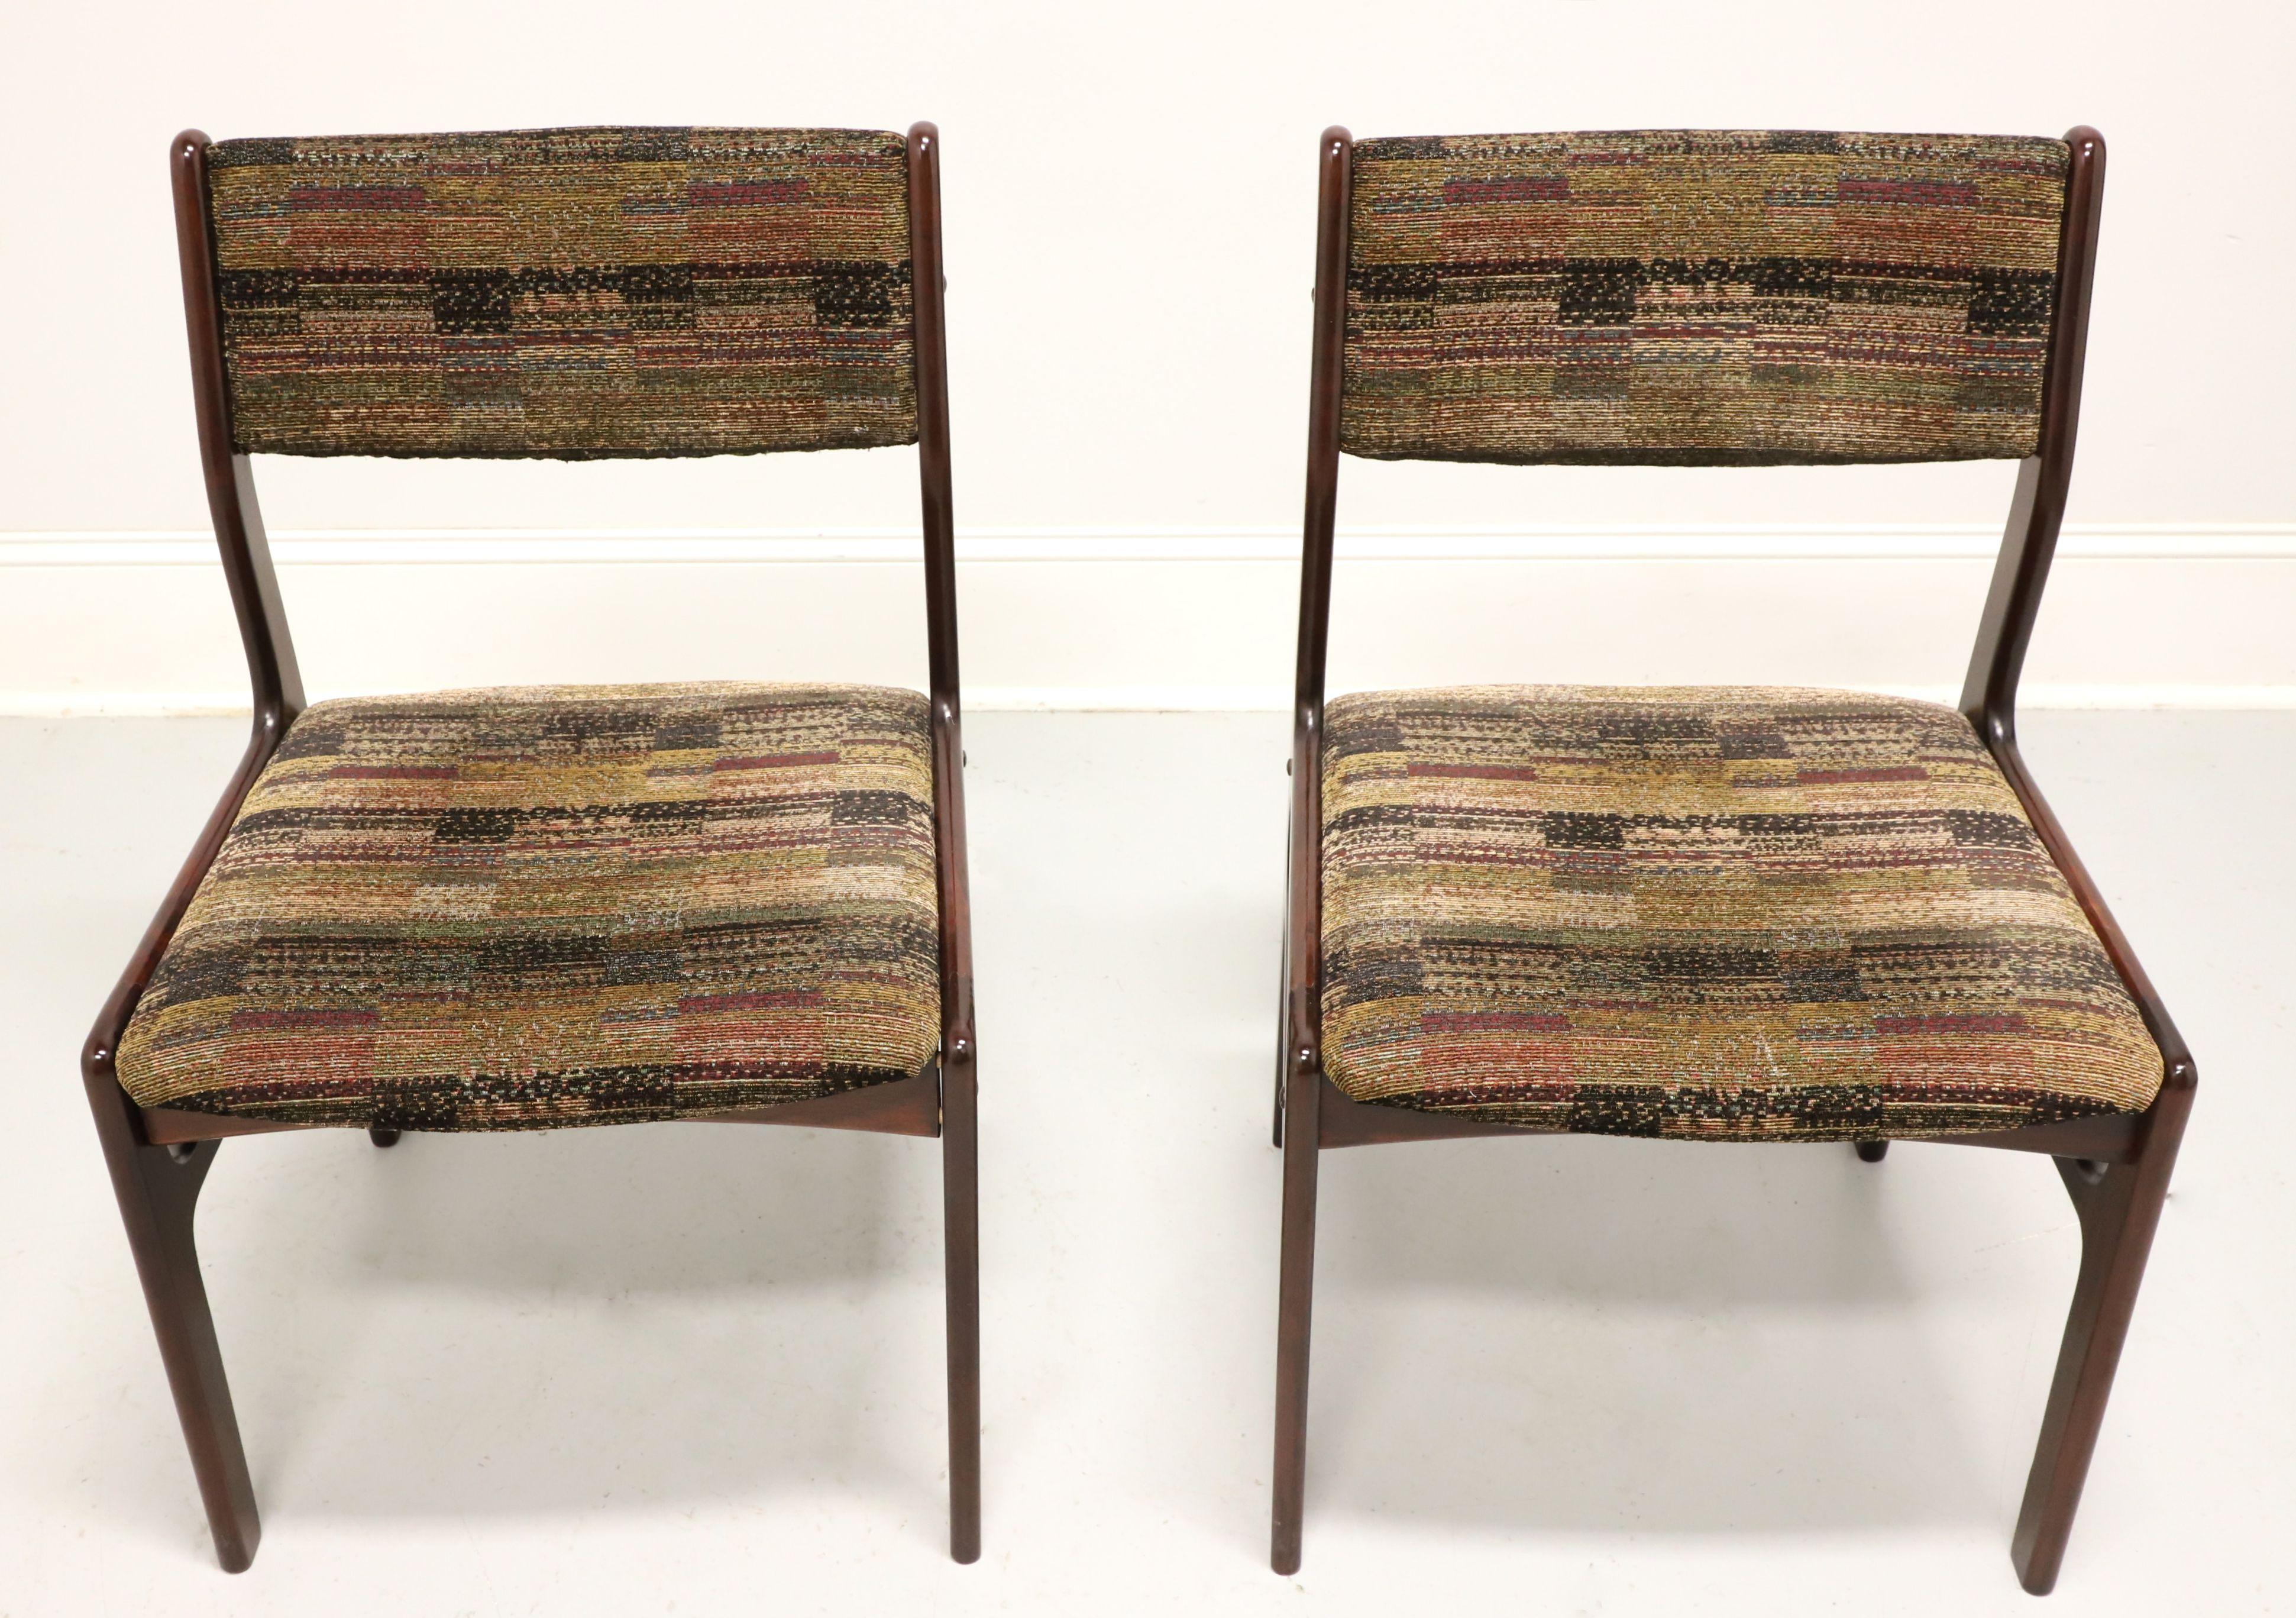 A pair of Danish Modern dining side chairs by Dyrlund. Solid rosewood with curved backrest, multi-color earth tones tweed-like fabric upholstered backrest & seat, upper side stretchers and straight legs. Made in Denmark, in the mid 20th